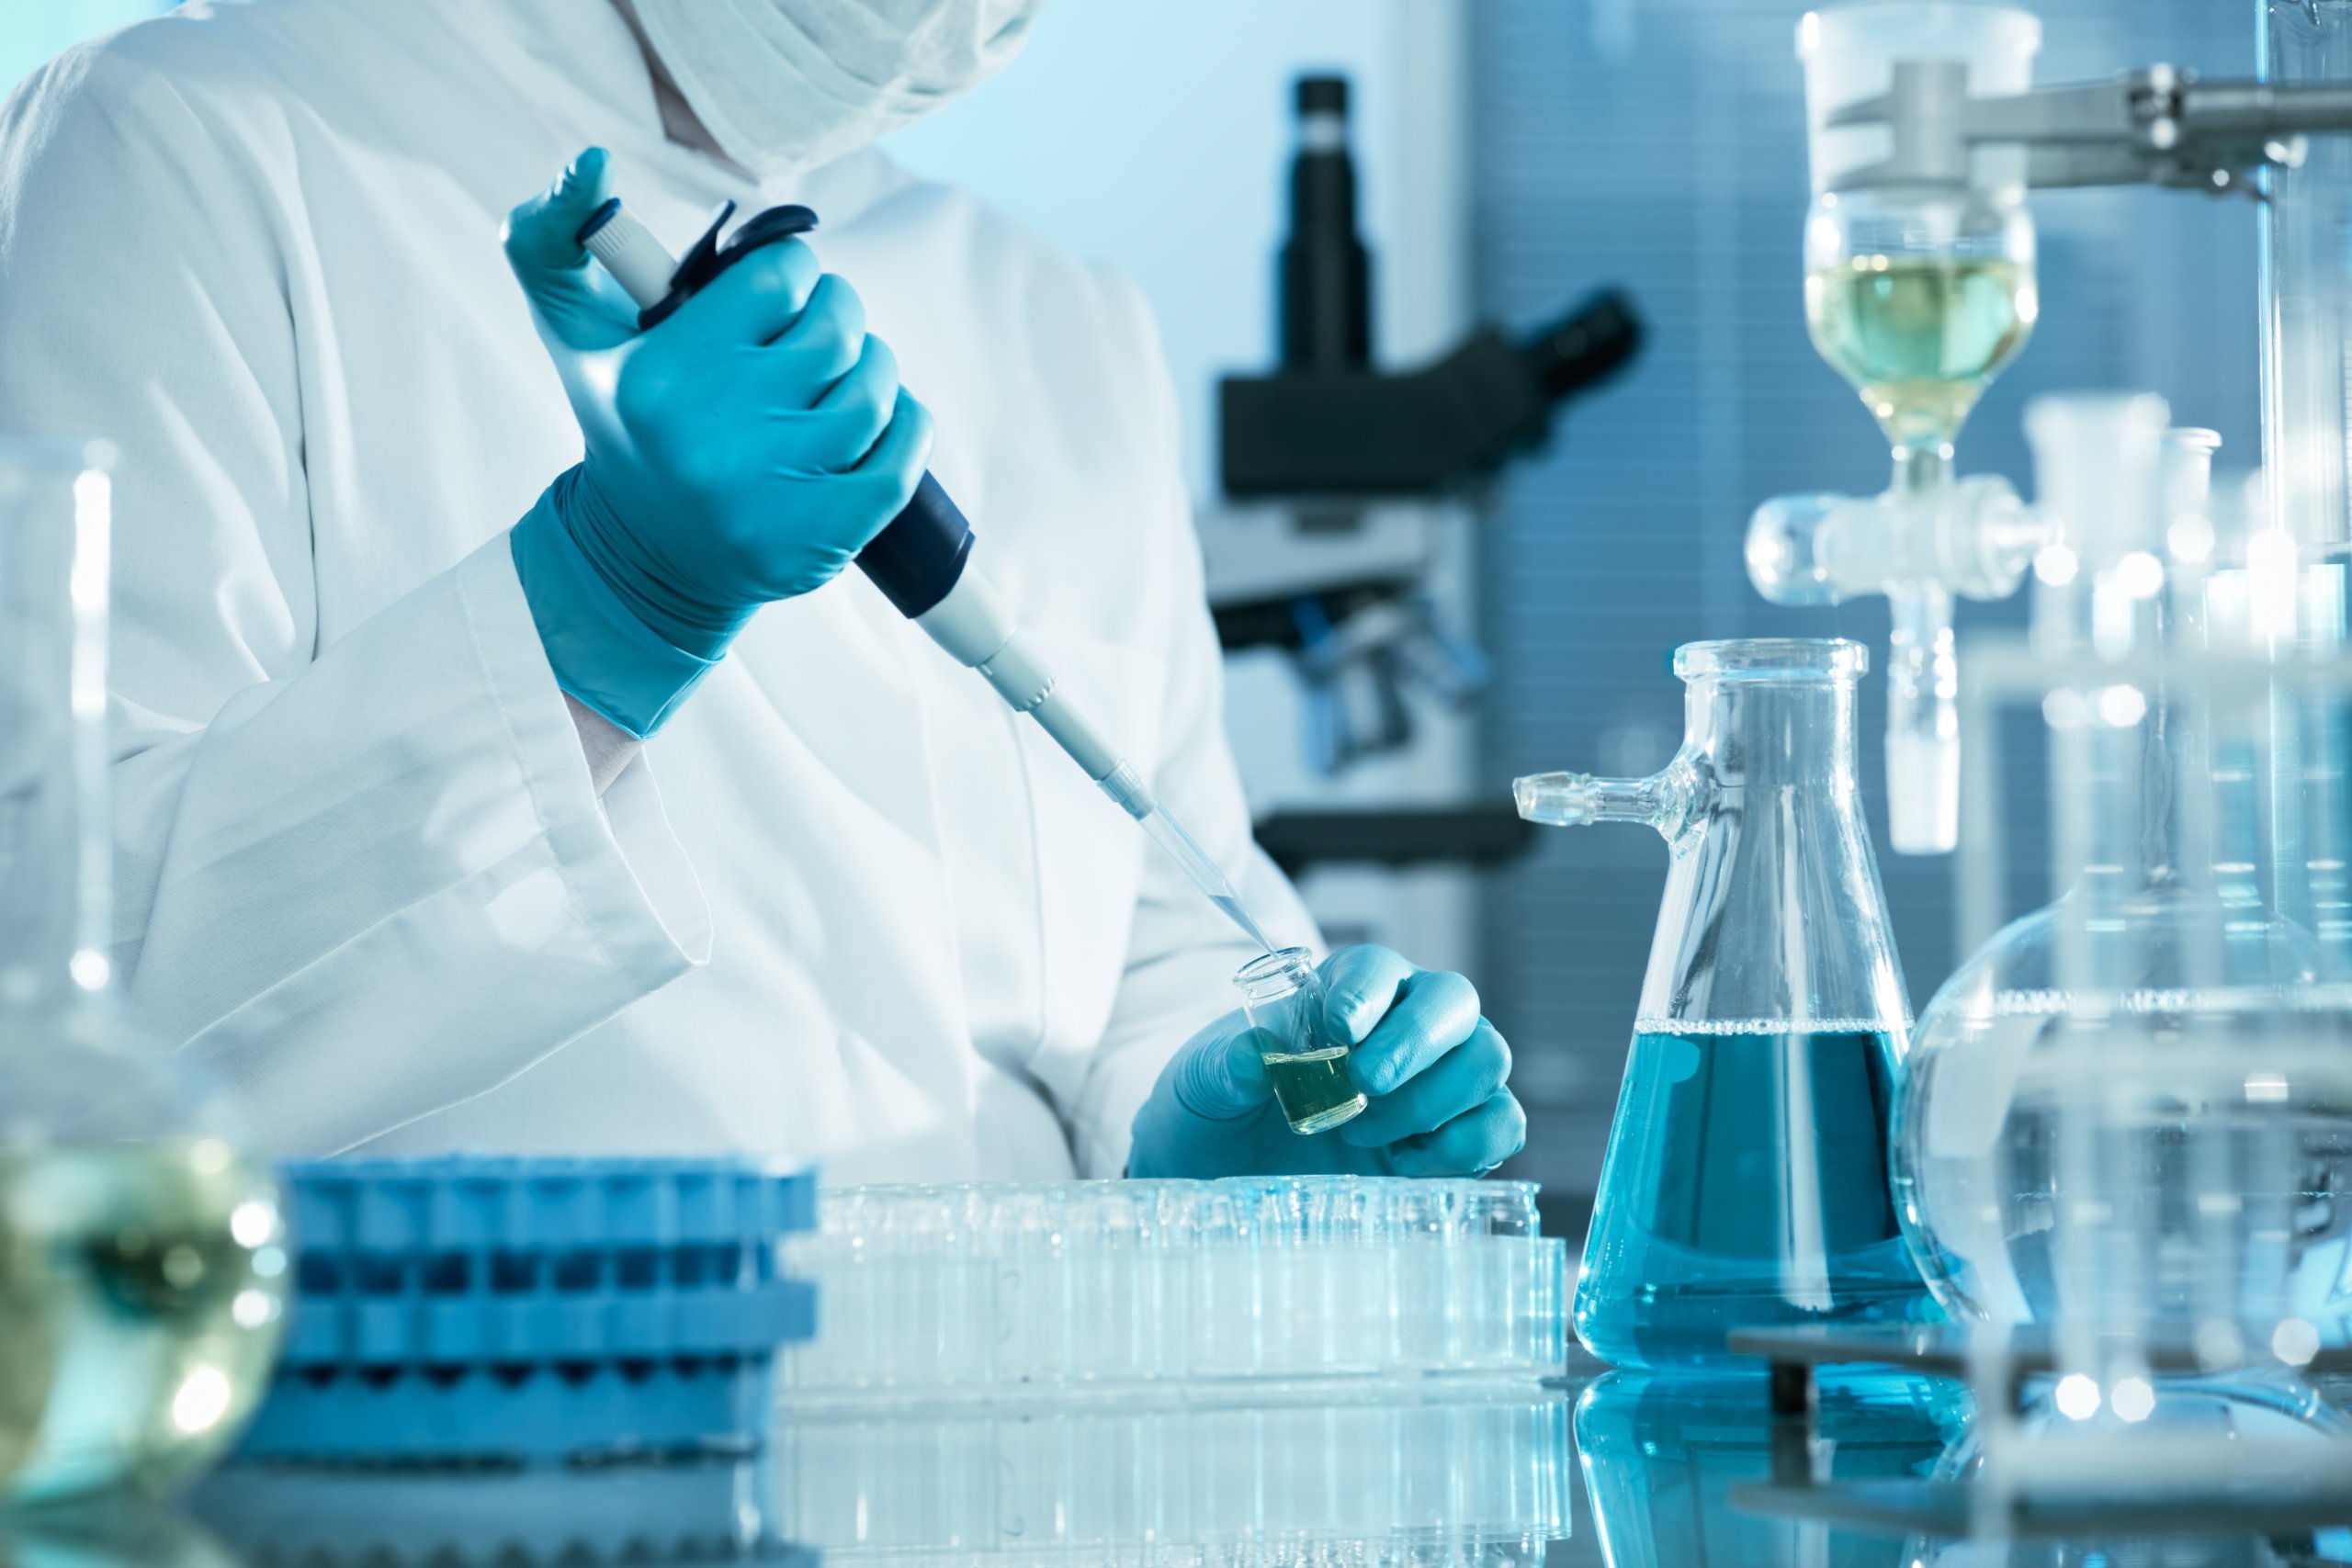 Science technician in white coat holding beaker surrounded by vials with blue liquid